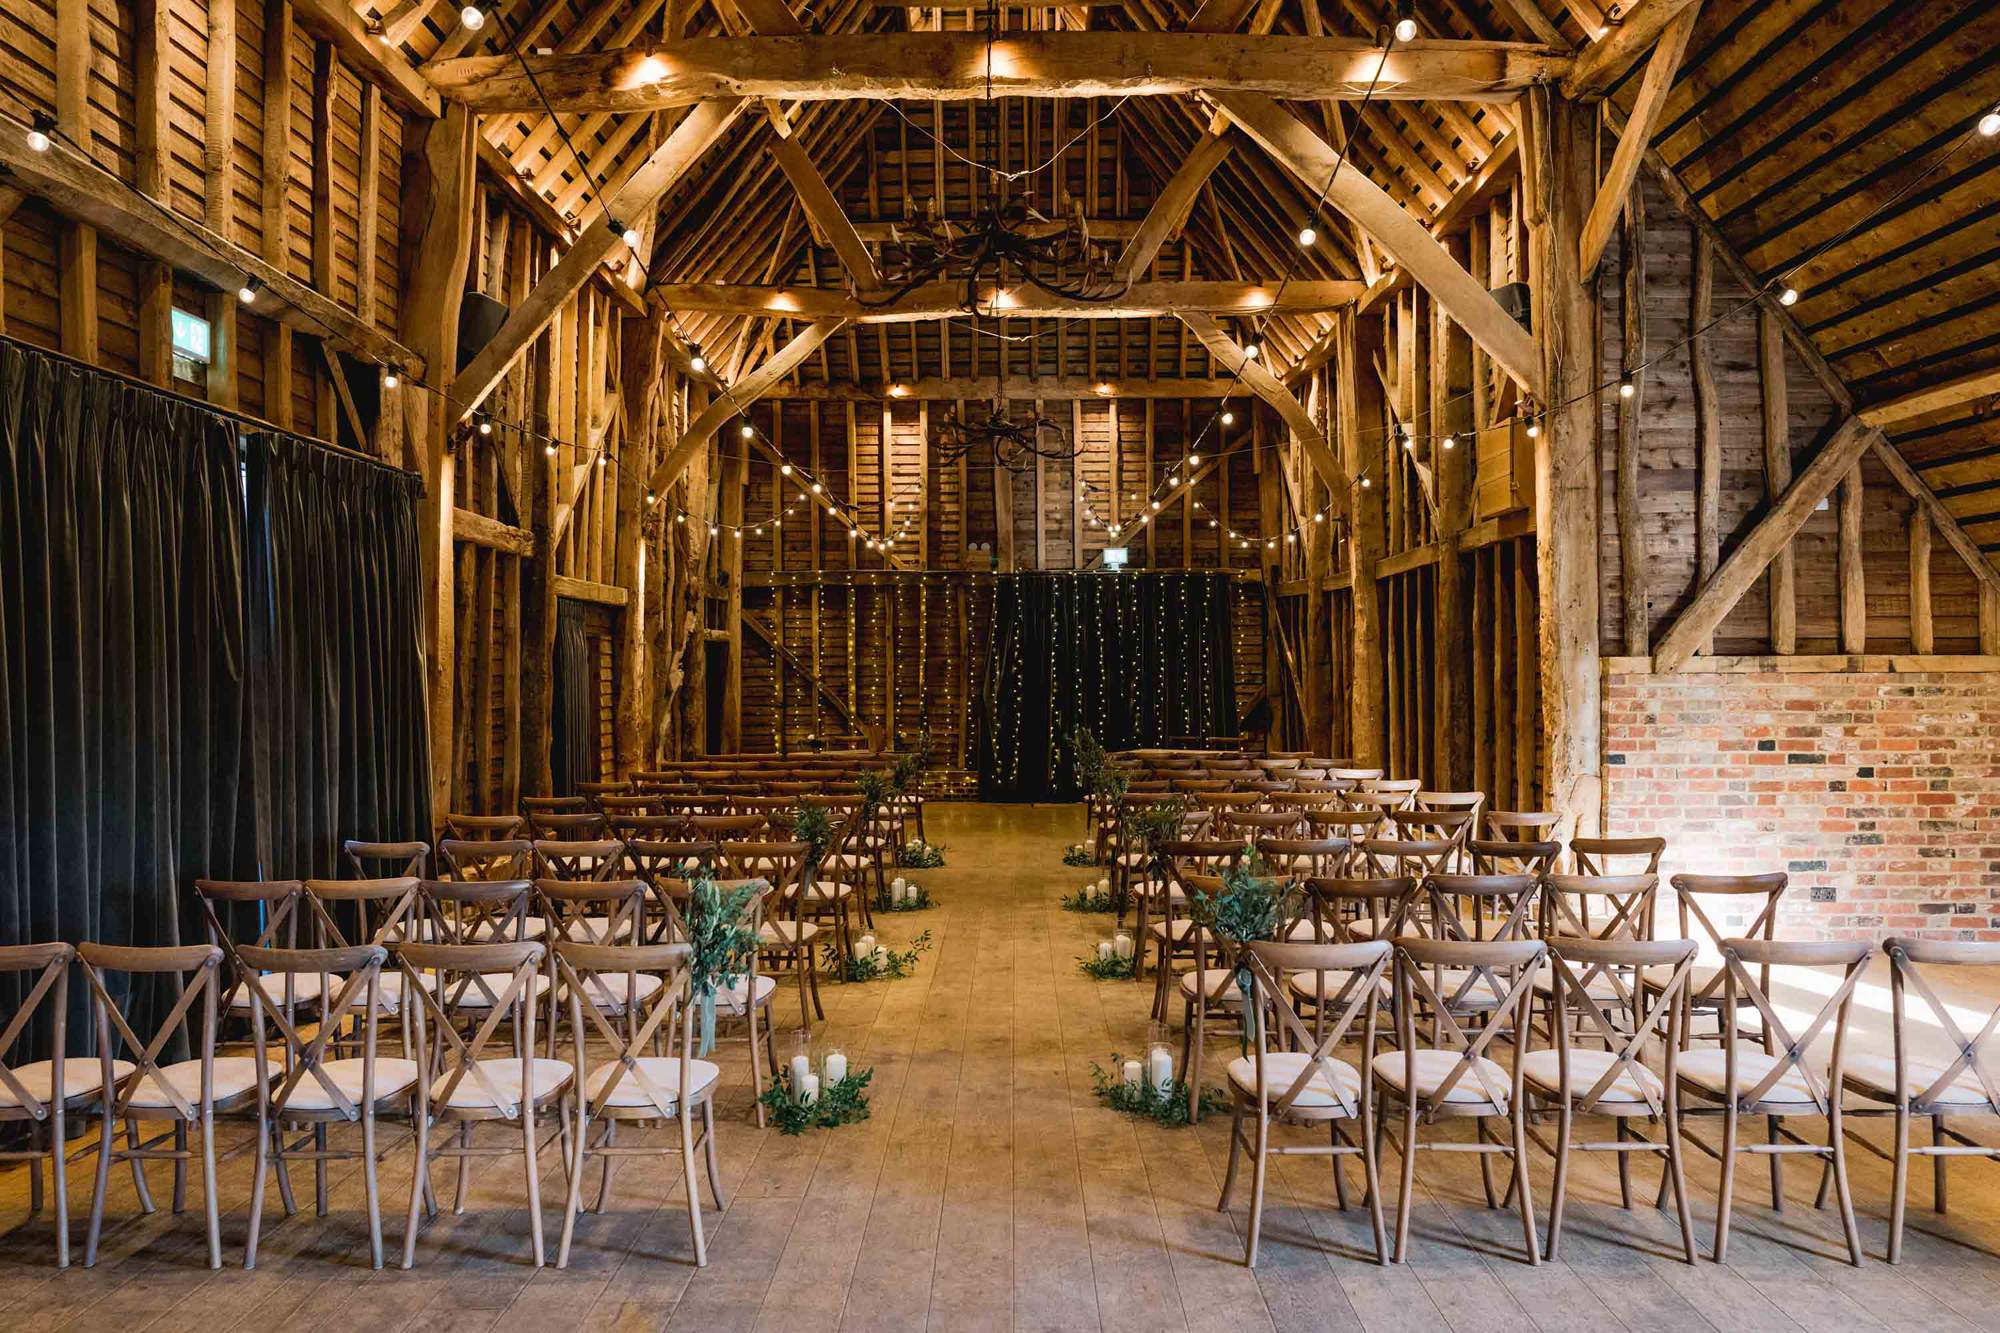 Wedding ceremony set up in the barn at The Farmhouse at Redcoats in Hitchin, Hertfordshire.